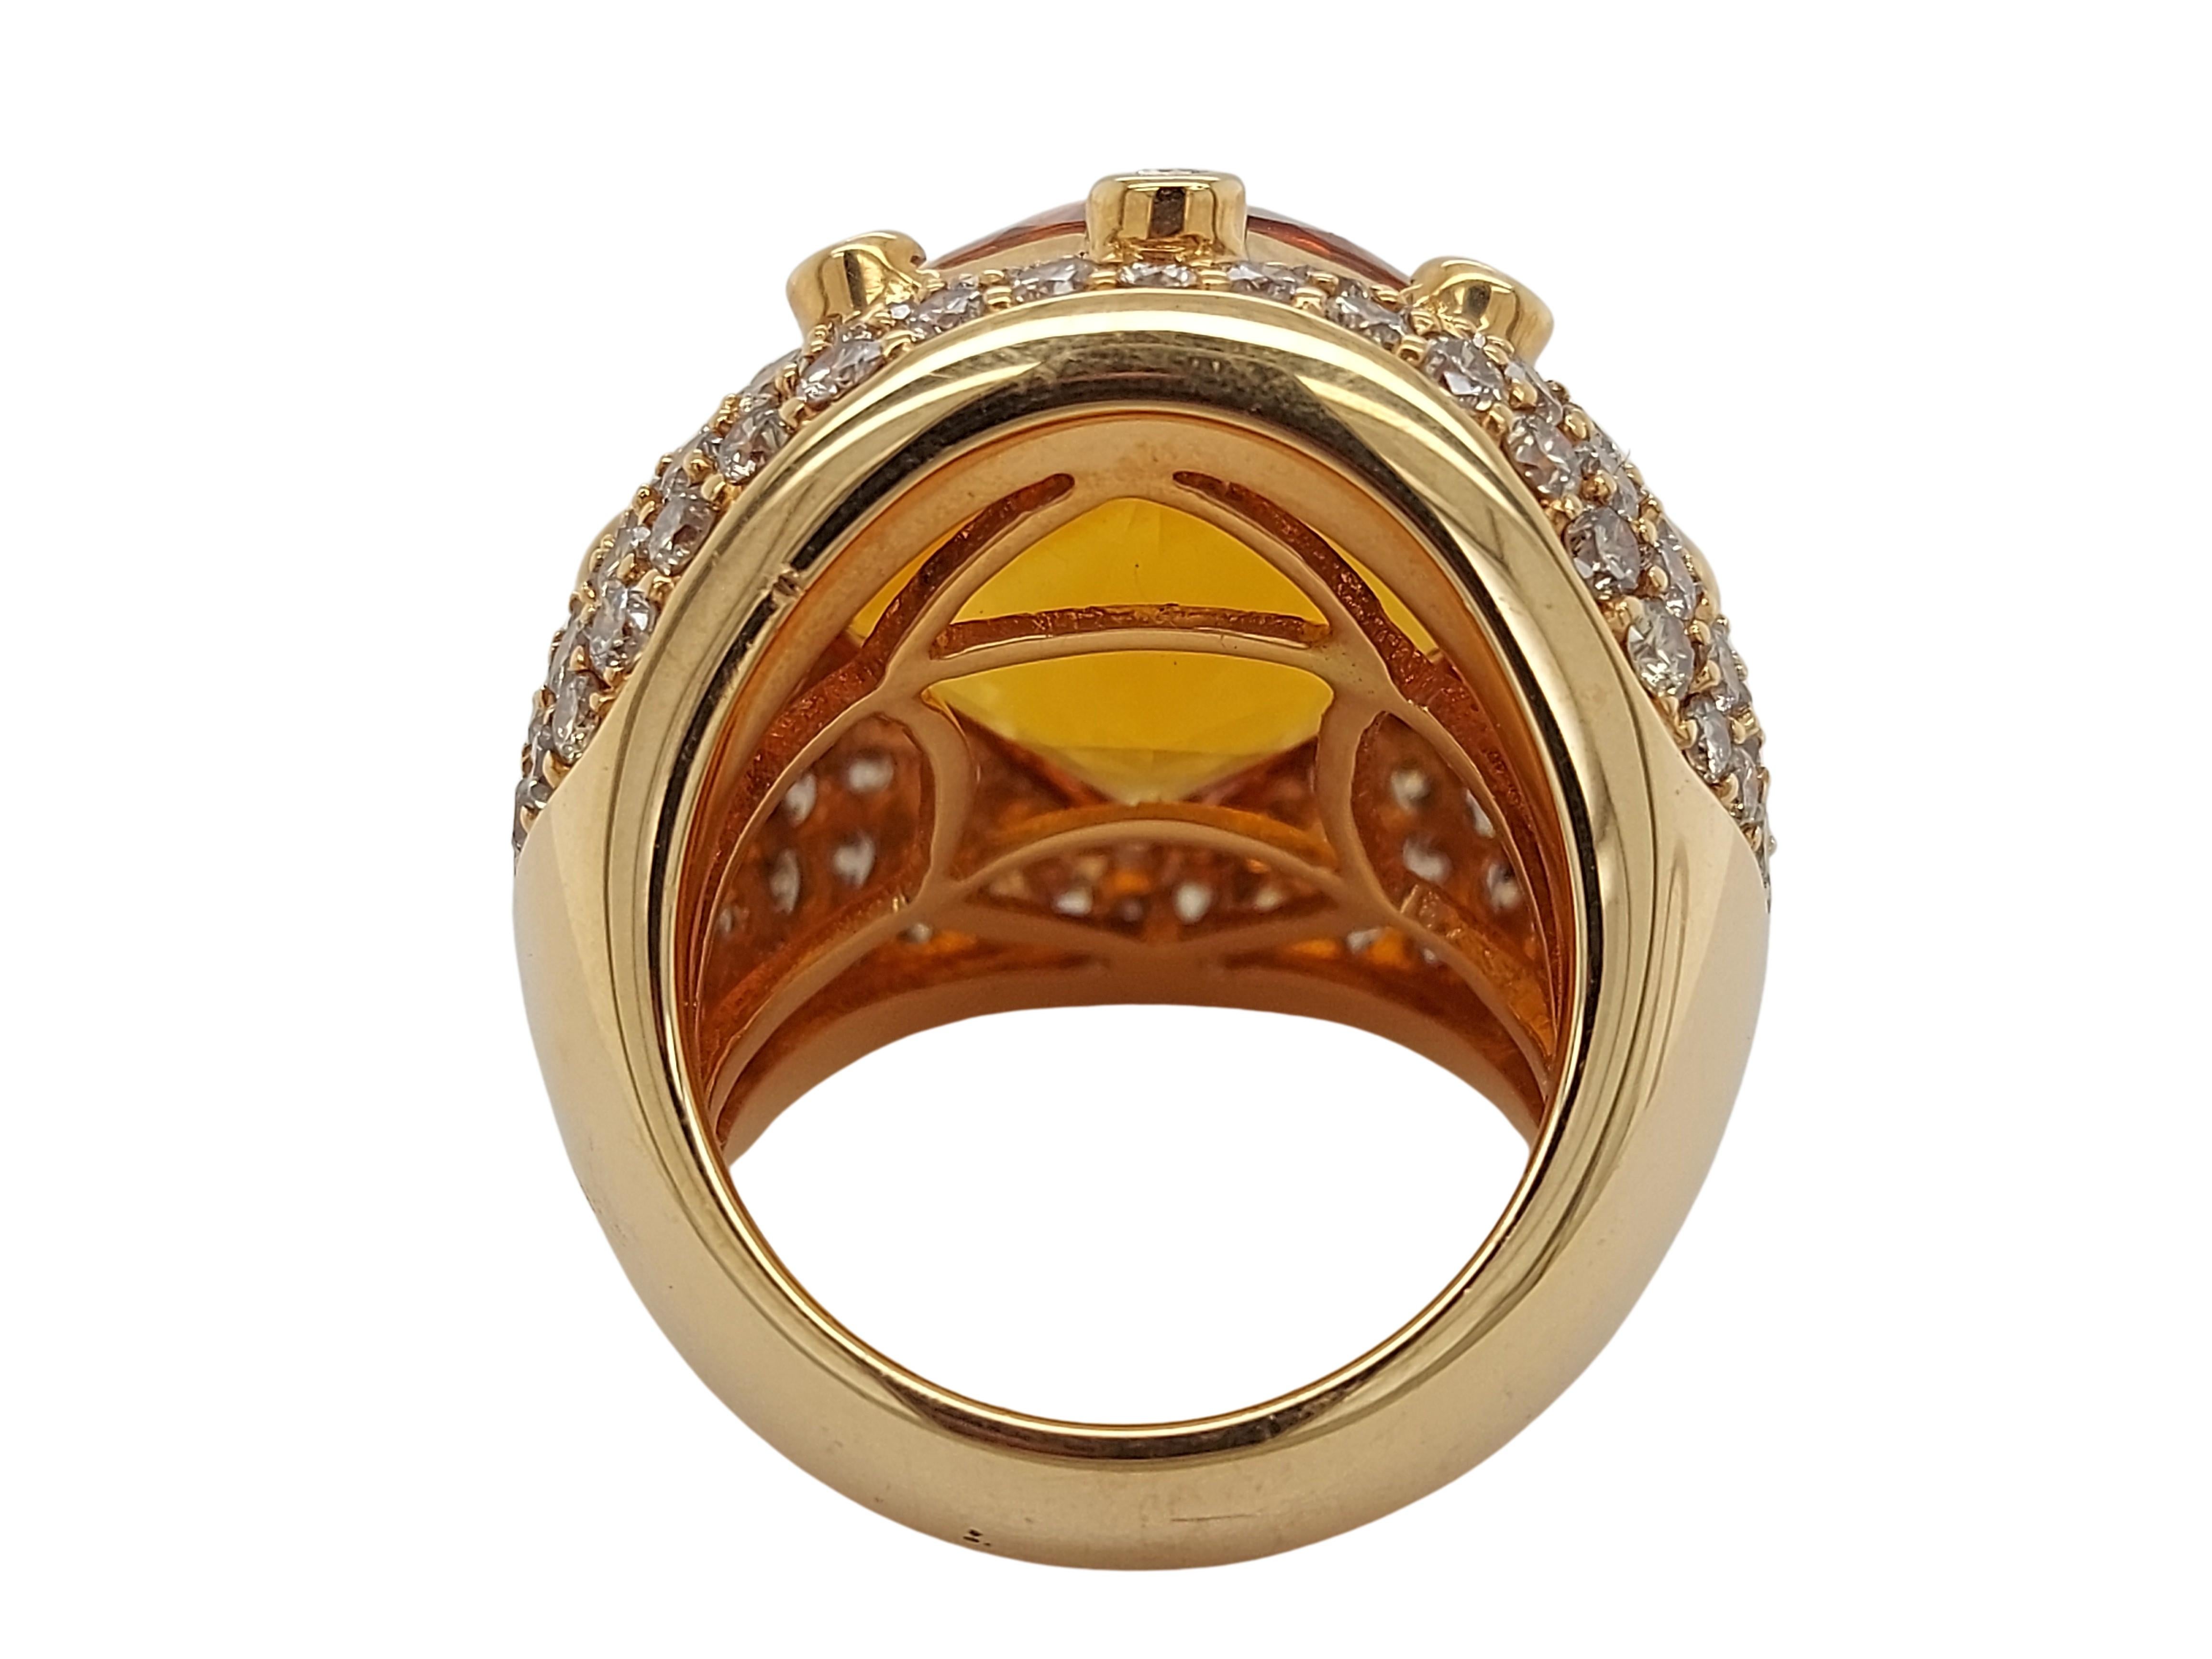 Brilliant Cut Beautiful 18kt Pink Gold Ring with Large 22.50 Ct Citrine and 5.25 Ct Diamonds For Sale